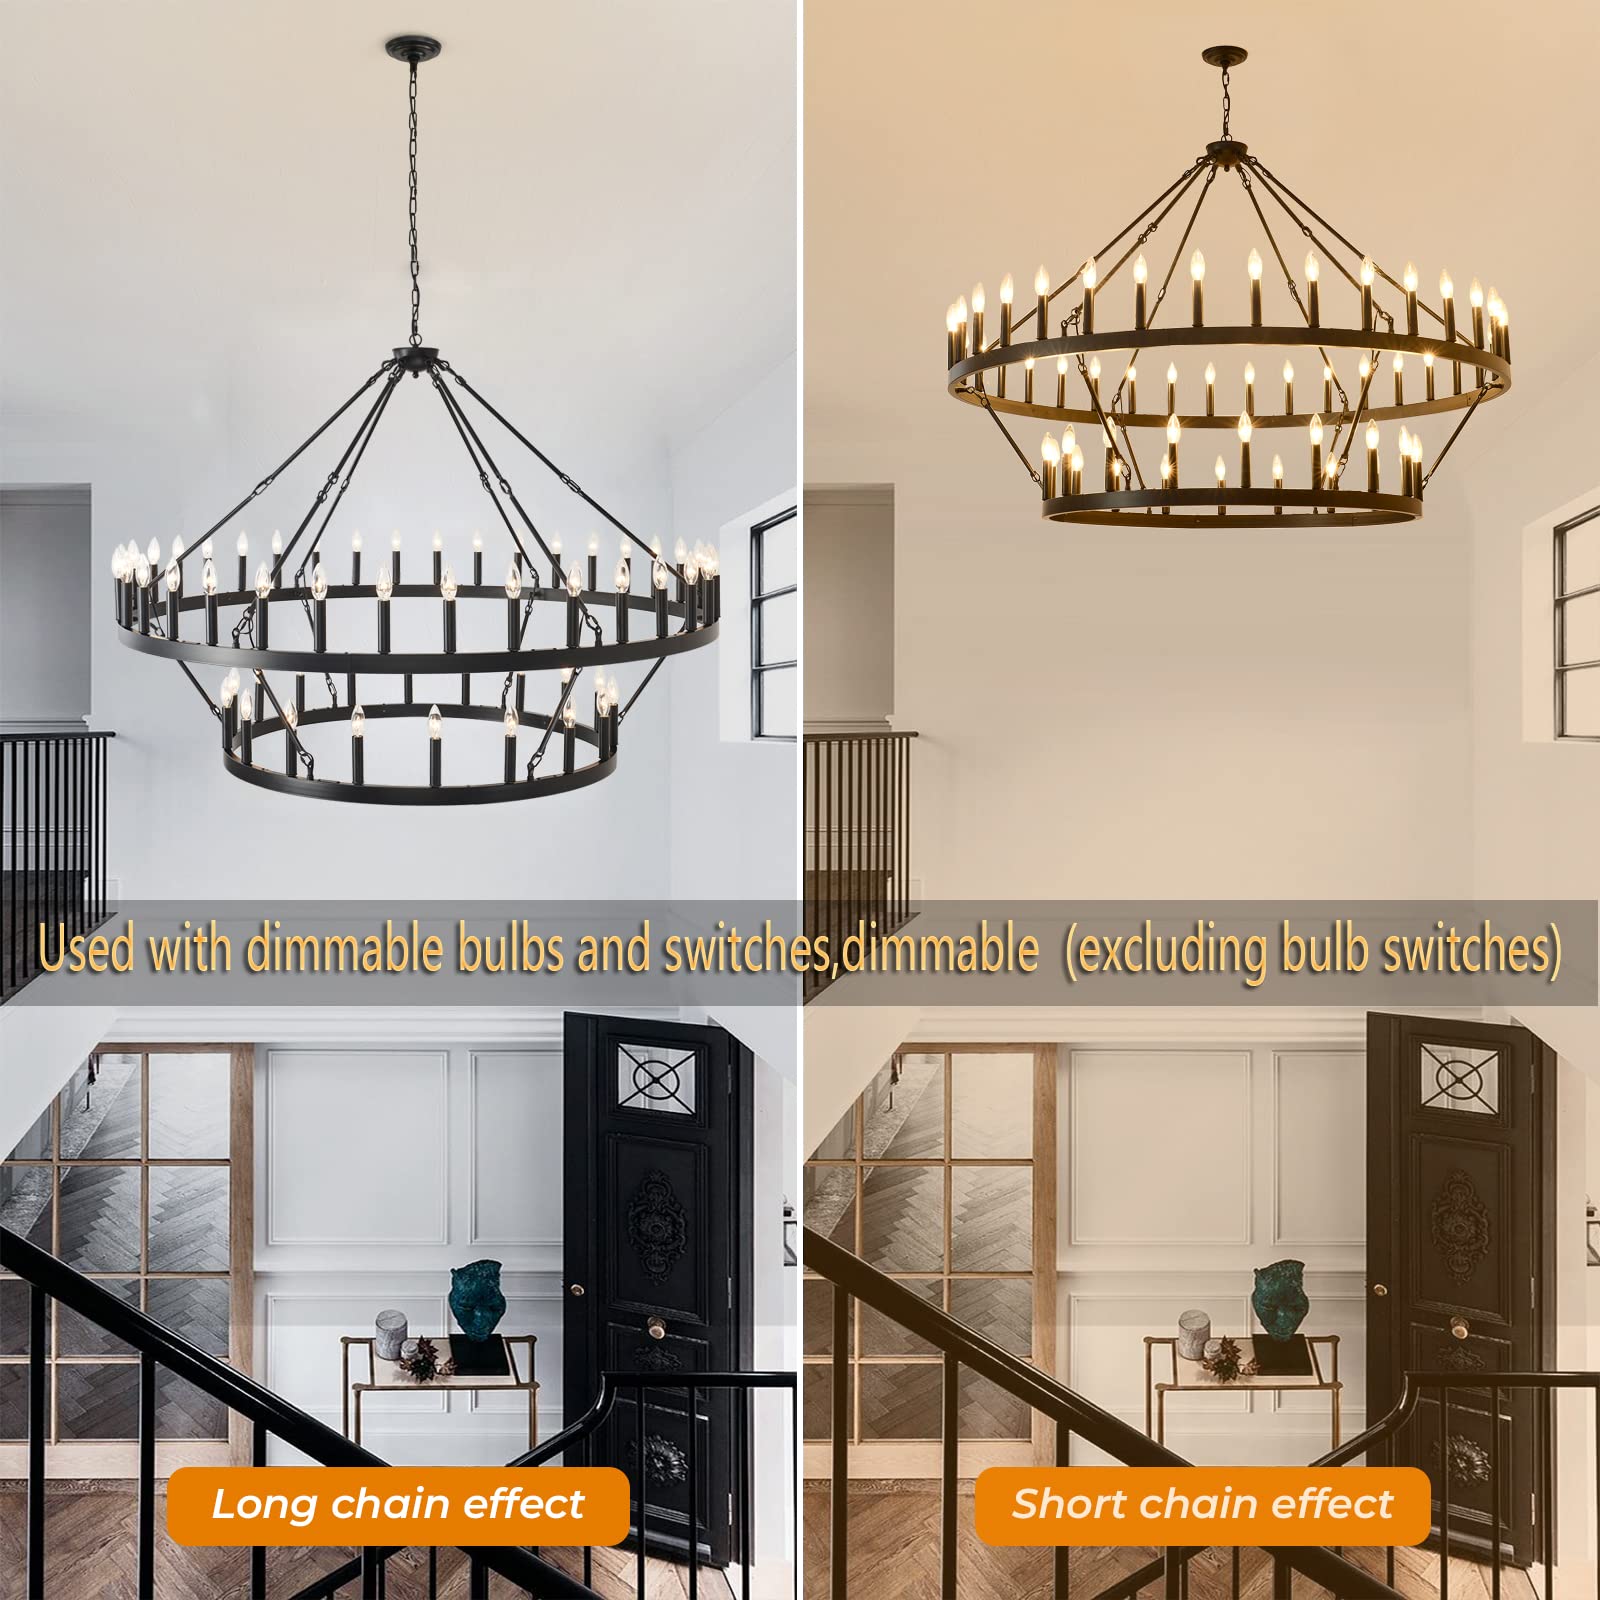 celimi Large Wagon Wheel Chandelier Black Round Modern Farmhouse 2 Tier 54-Lighting Fixtures for High Ceilings, Dining Room,Living Room